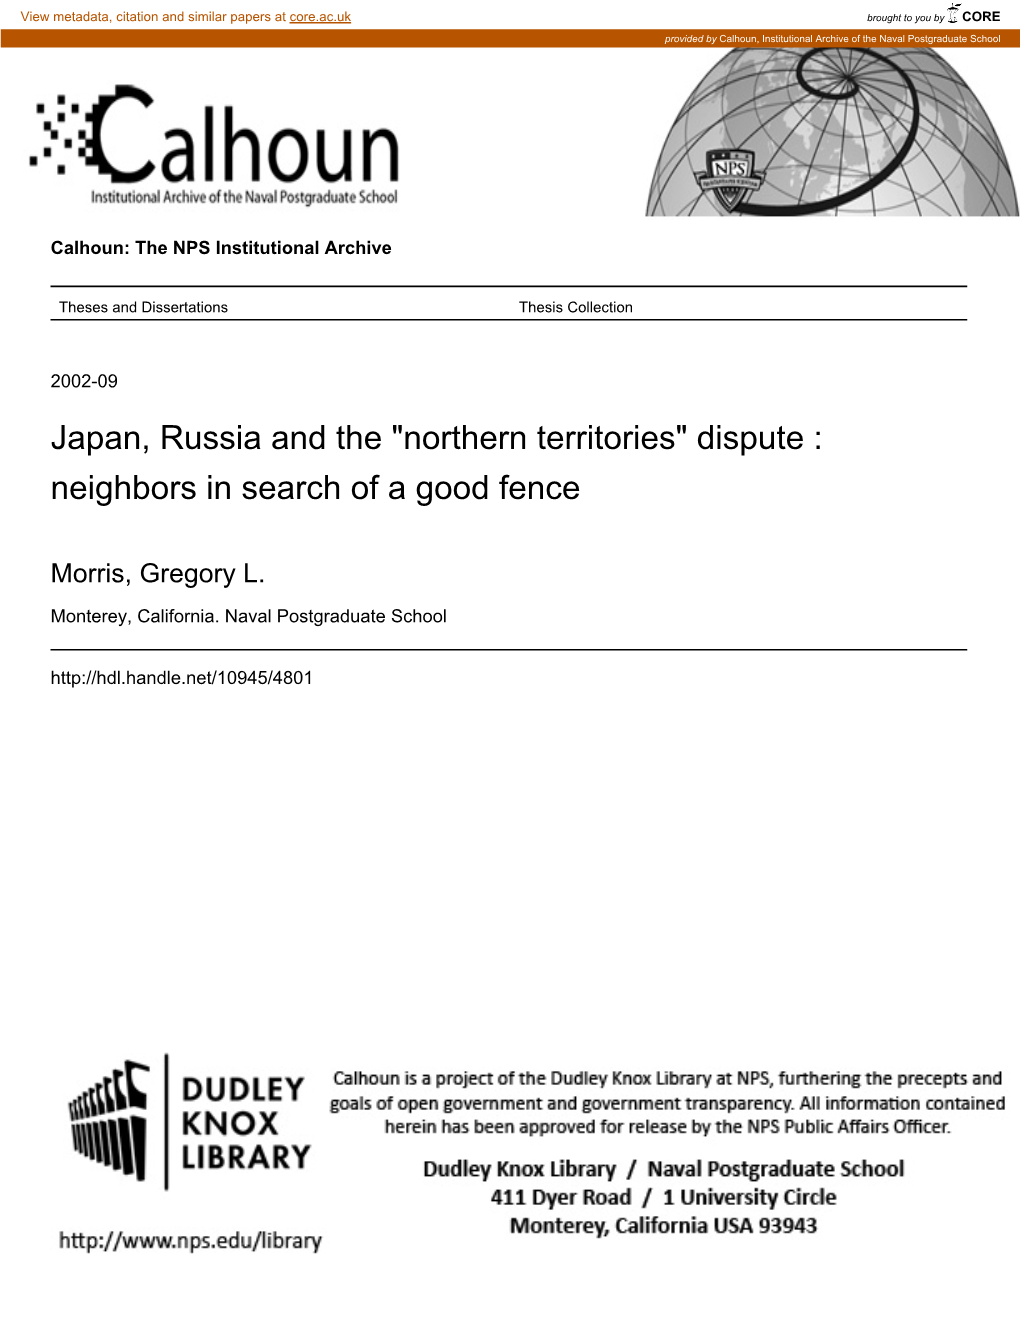 Japan, Russia and the "Northern Territories" Dispute : Neighbors in Search of a Good Fence